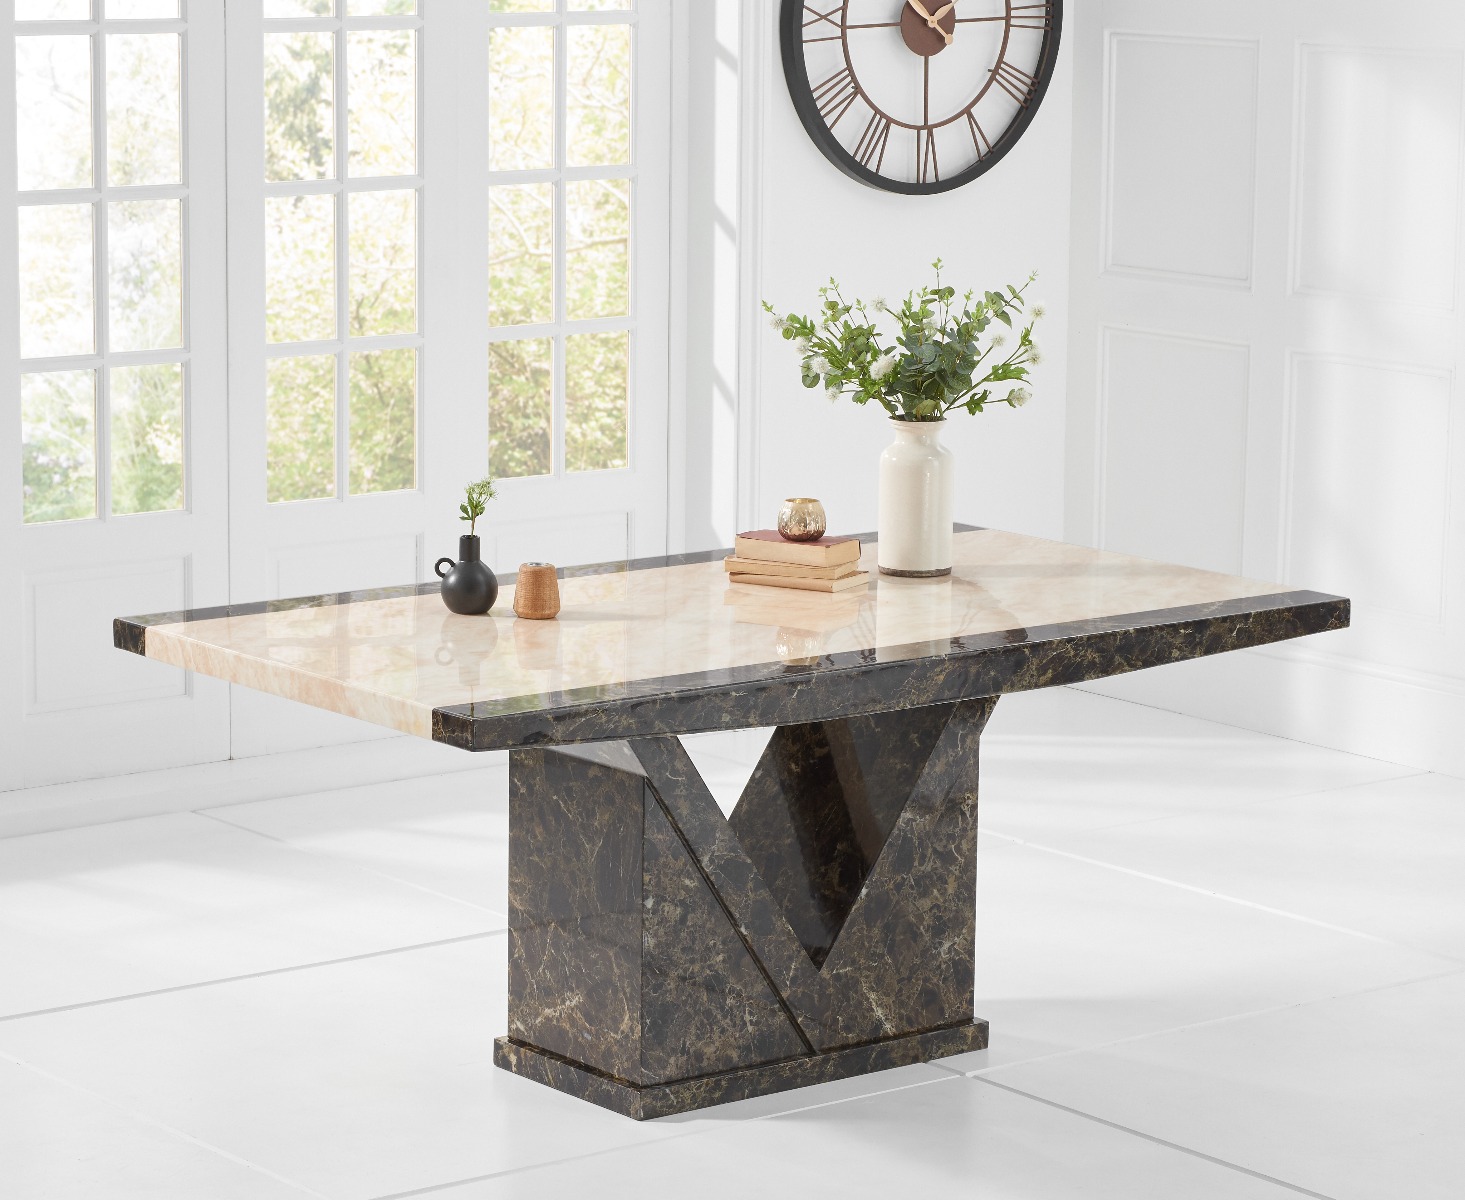 Tenore 180cm Marble Dining Table